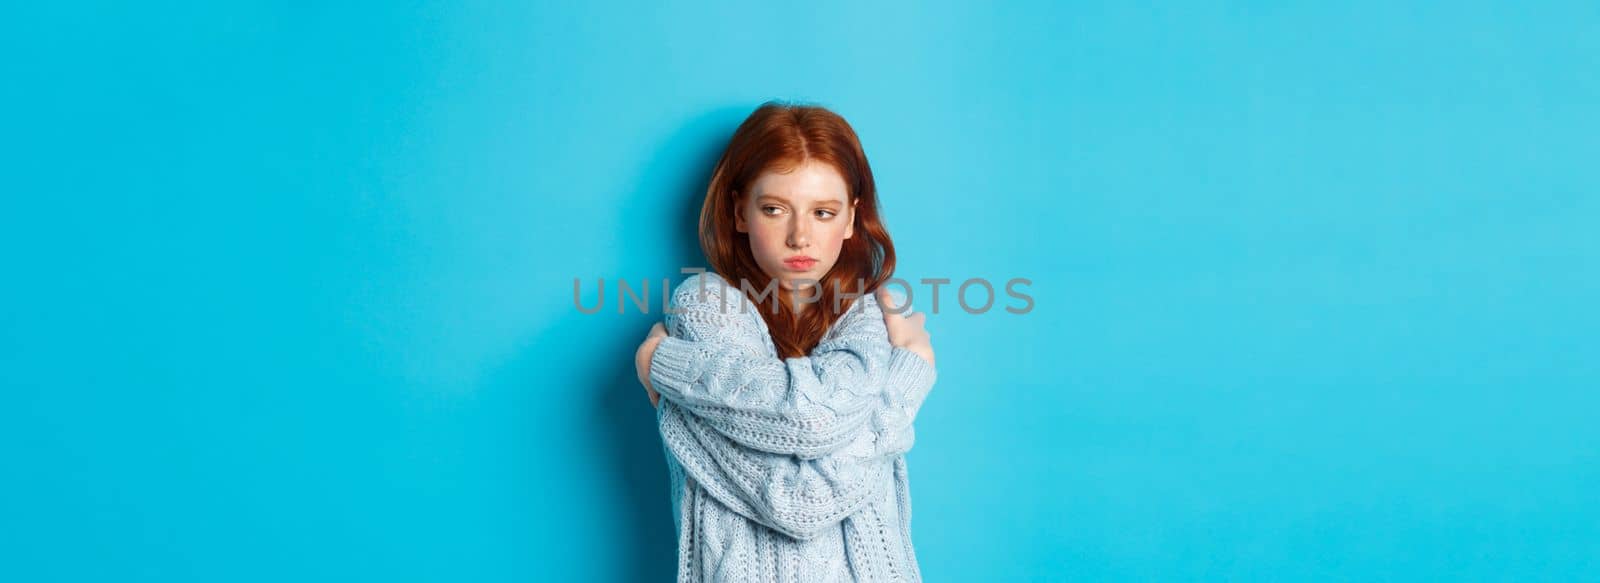 Silly and cute redhead girl pucker lips and looking offended, hugging herself and looking away offended, sulking and being upset, standing over blue background.